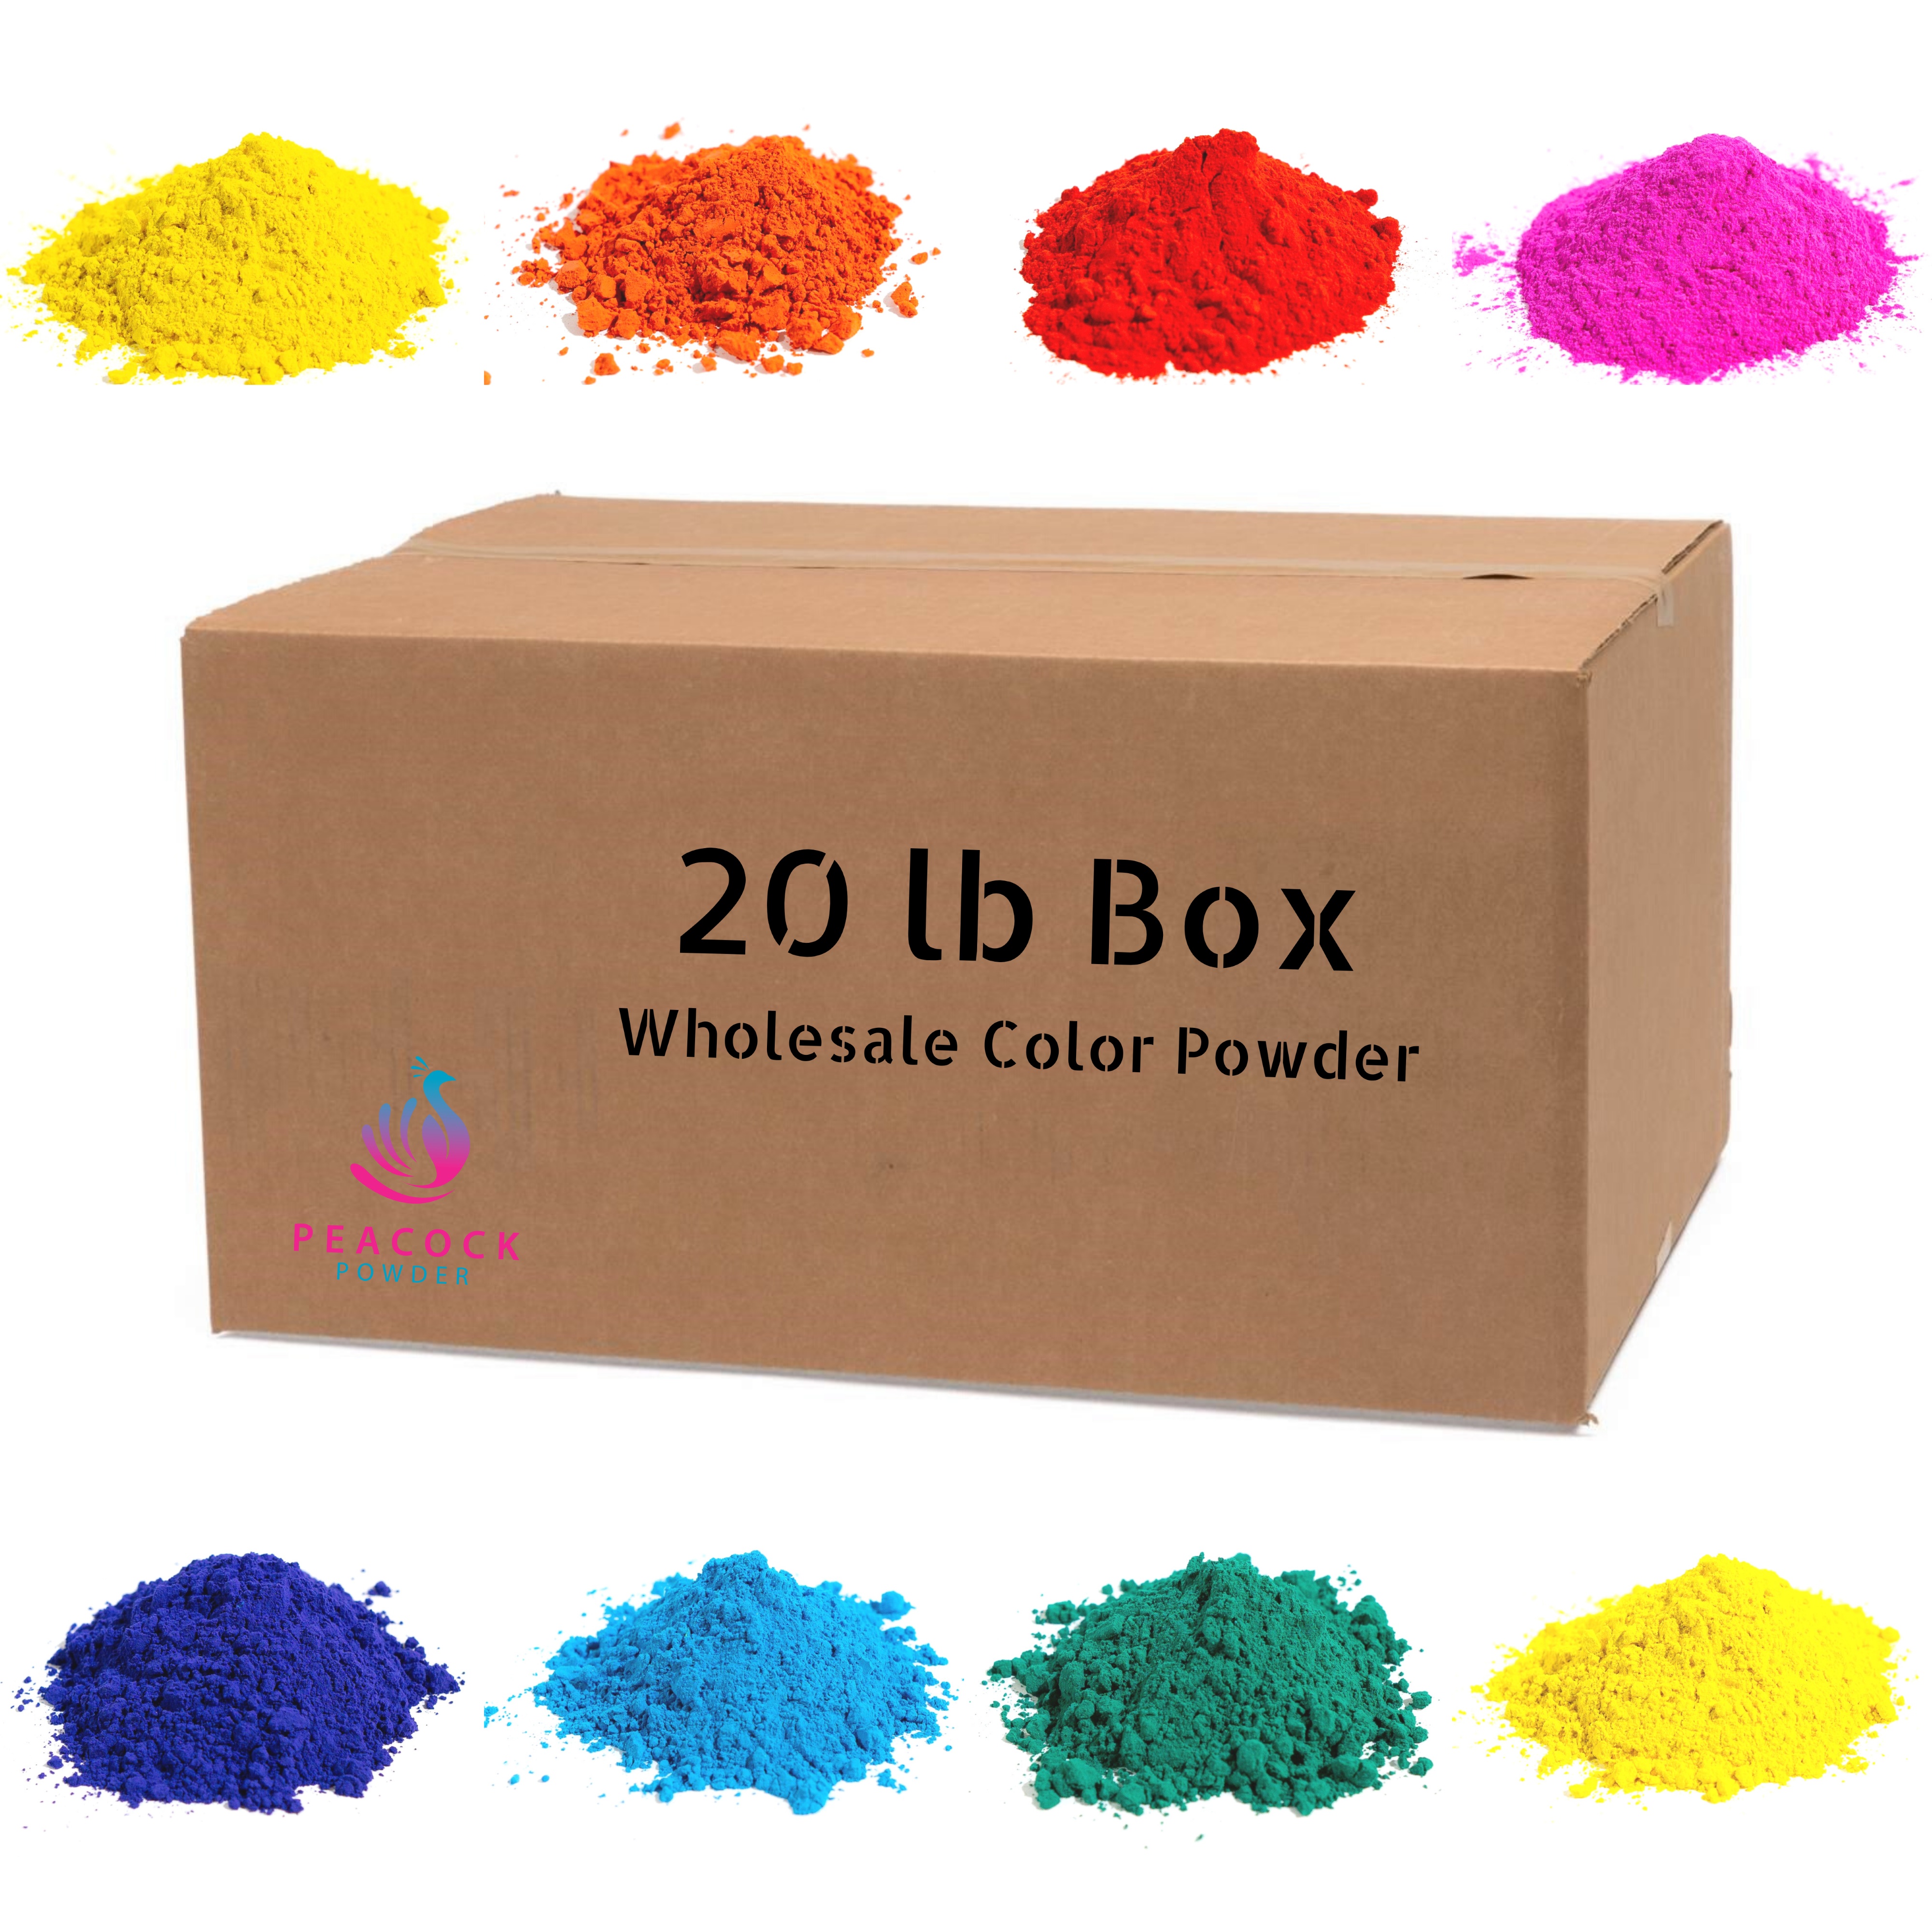 Holi Powder, Holi Gulal Color Packs SALE in USA, 8 Bags - 1 FREE PACK  #19371 | Buy Holi Color Powder Online